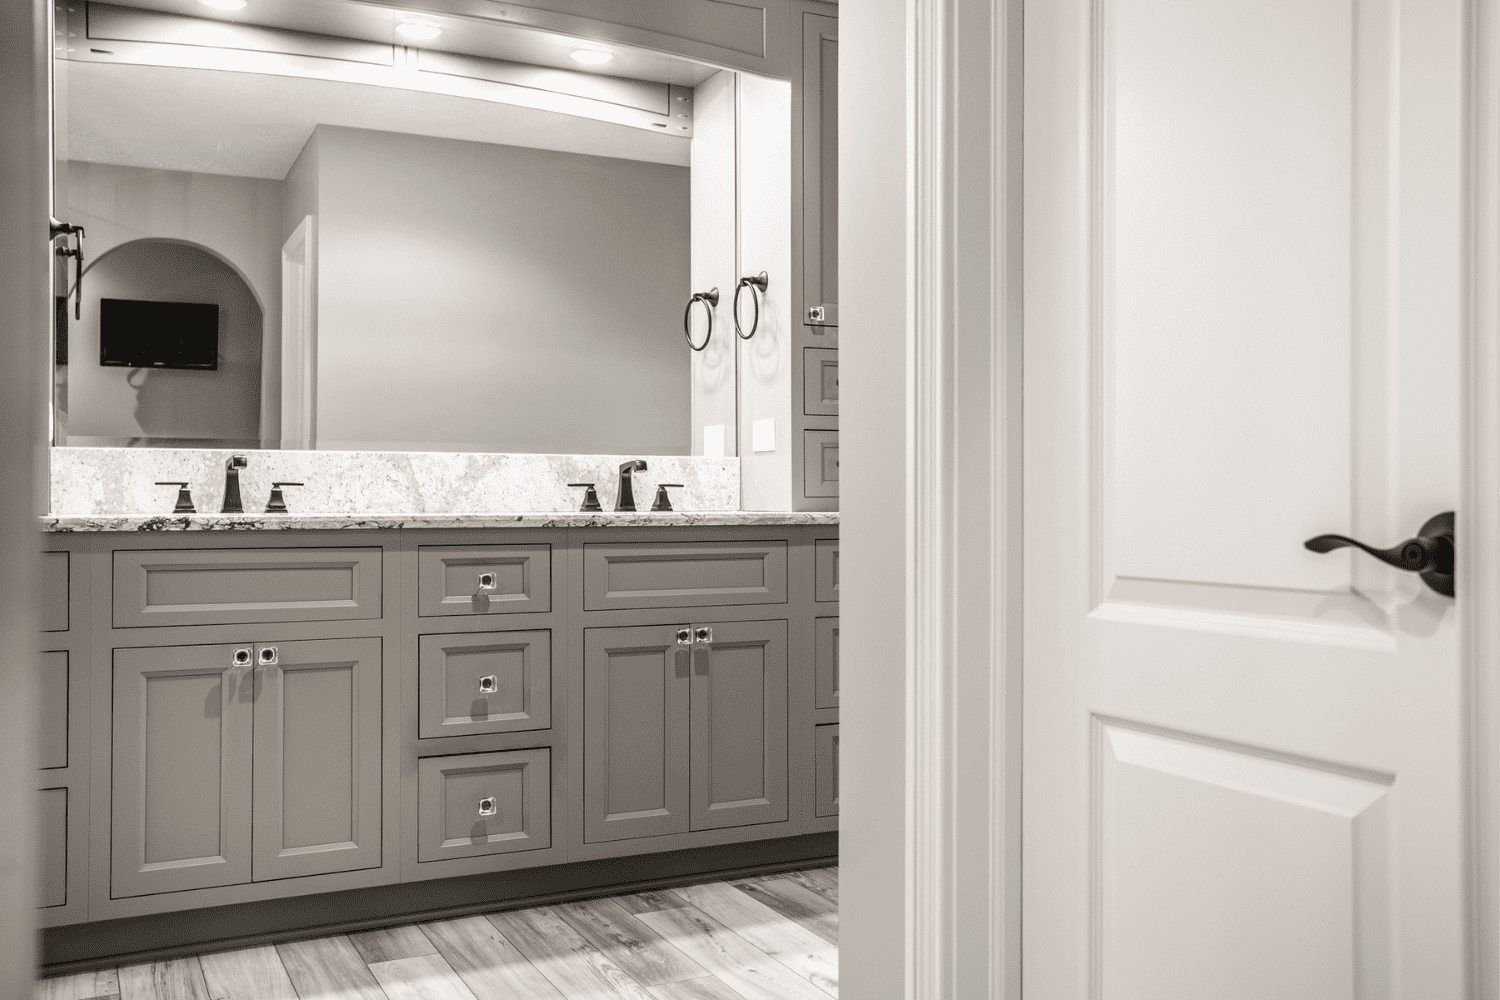 Nicholas Design Build | A bathroom with gray cabinets and a mirror.